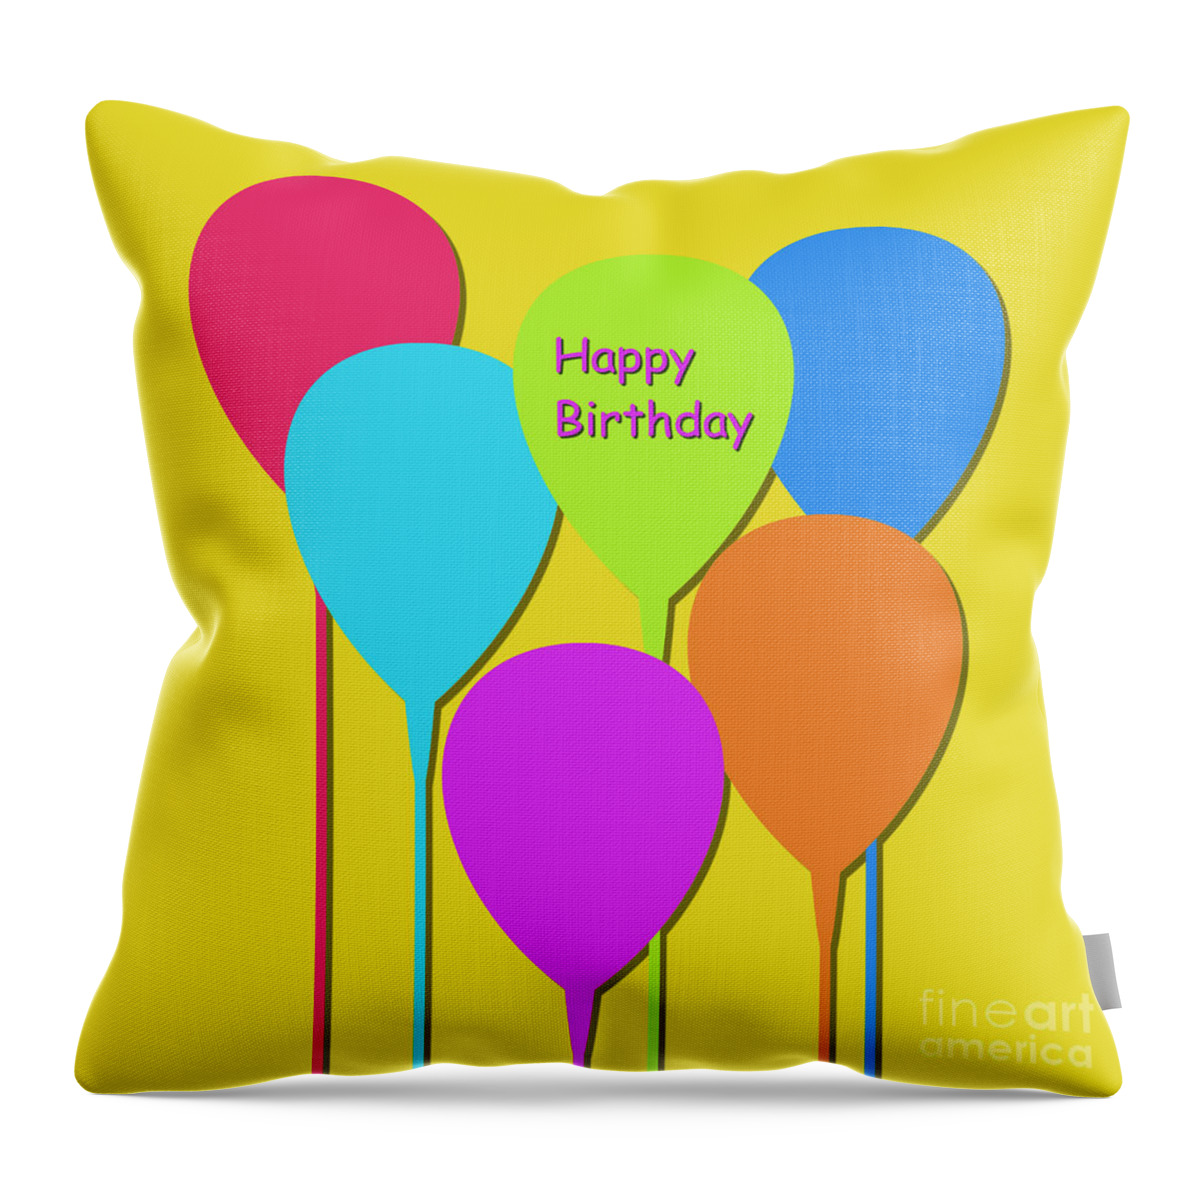 Design Throw Pillow featuring the mixed media Happy Birthday by Mando Xocco